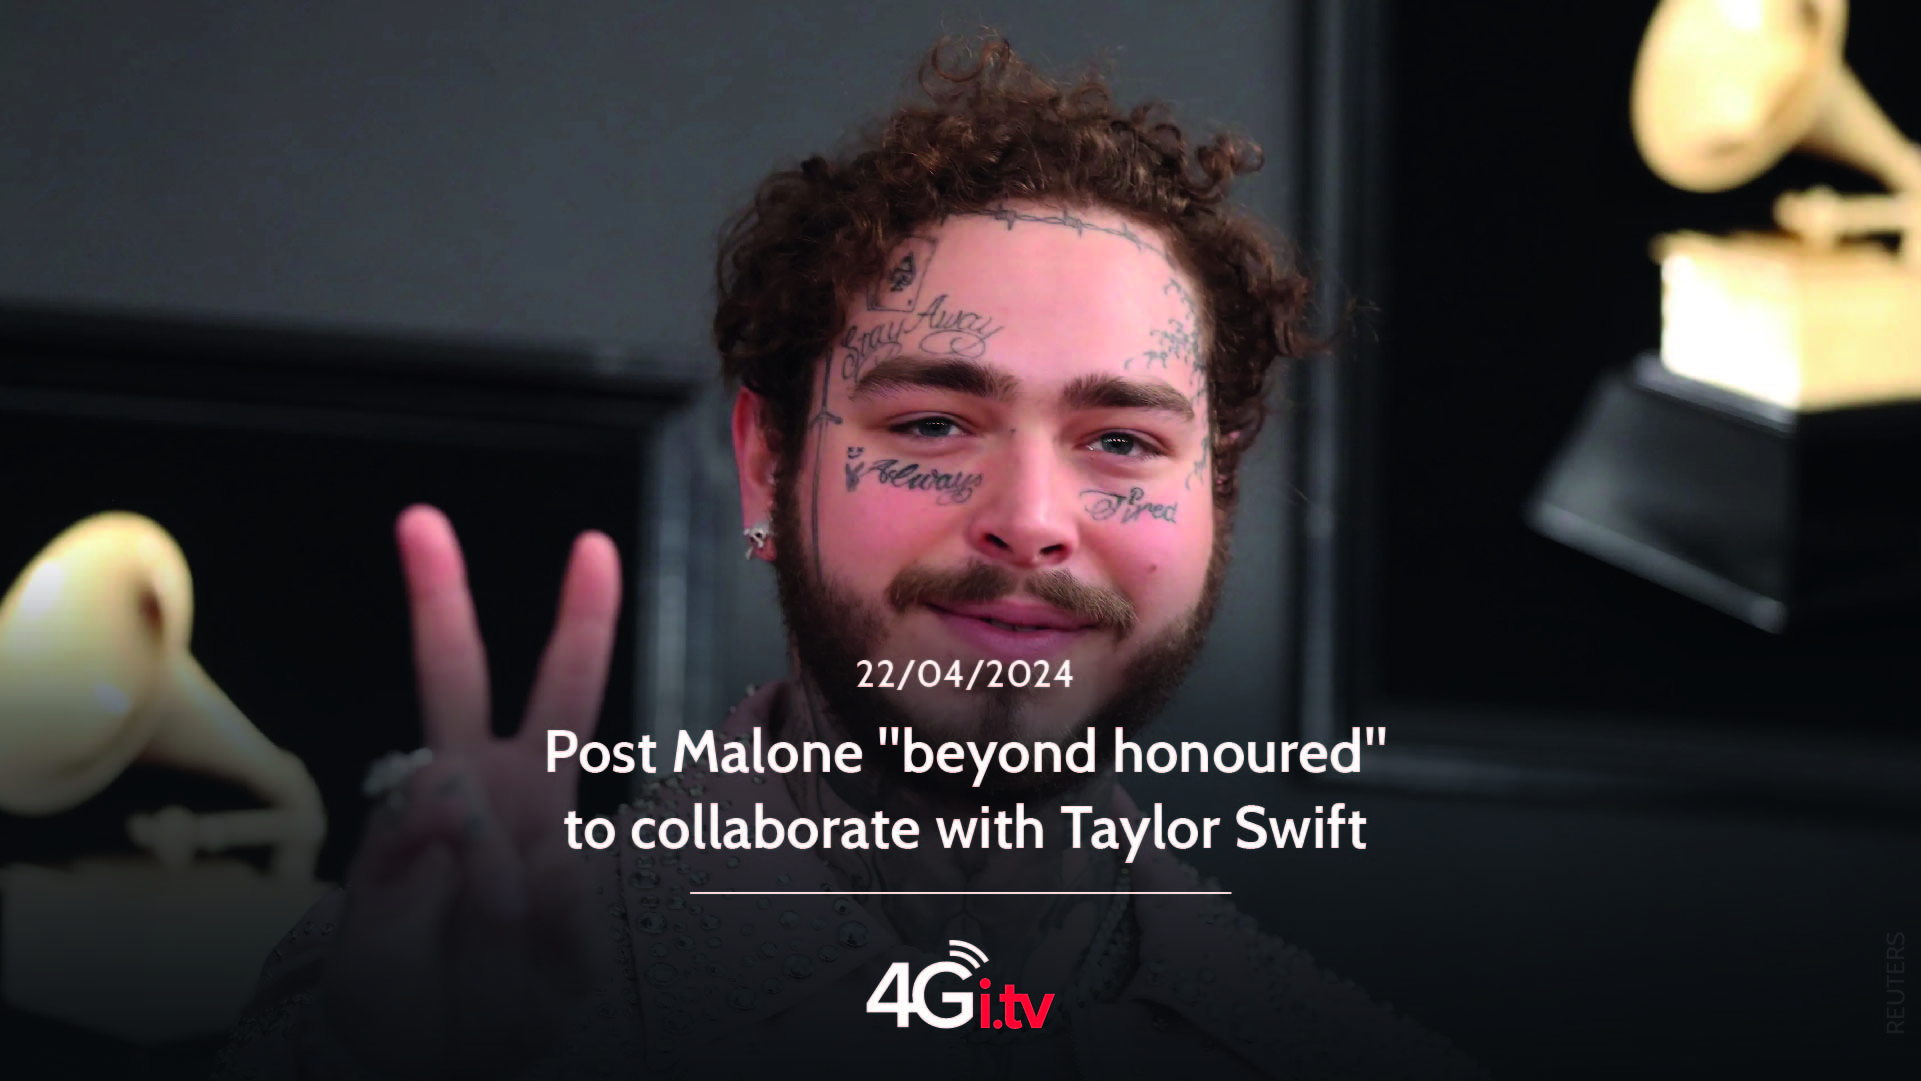 Подробнее о статье Post Malone “beyond honoured” to collaborate with Taylor Swift